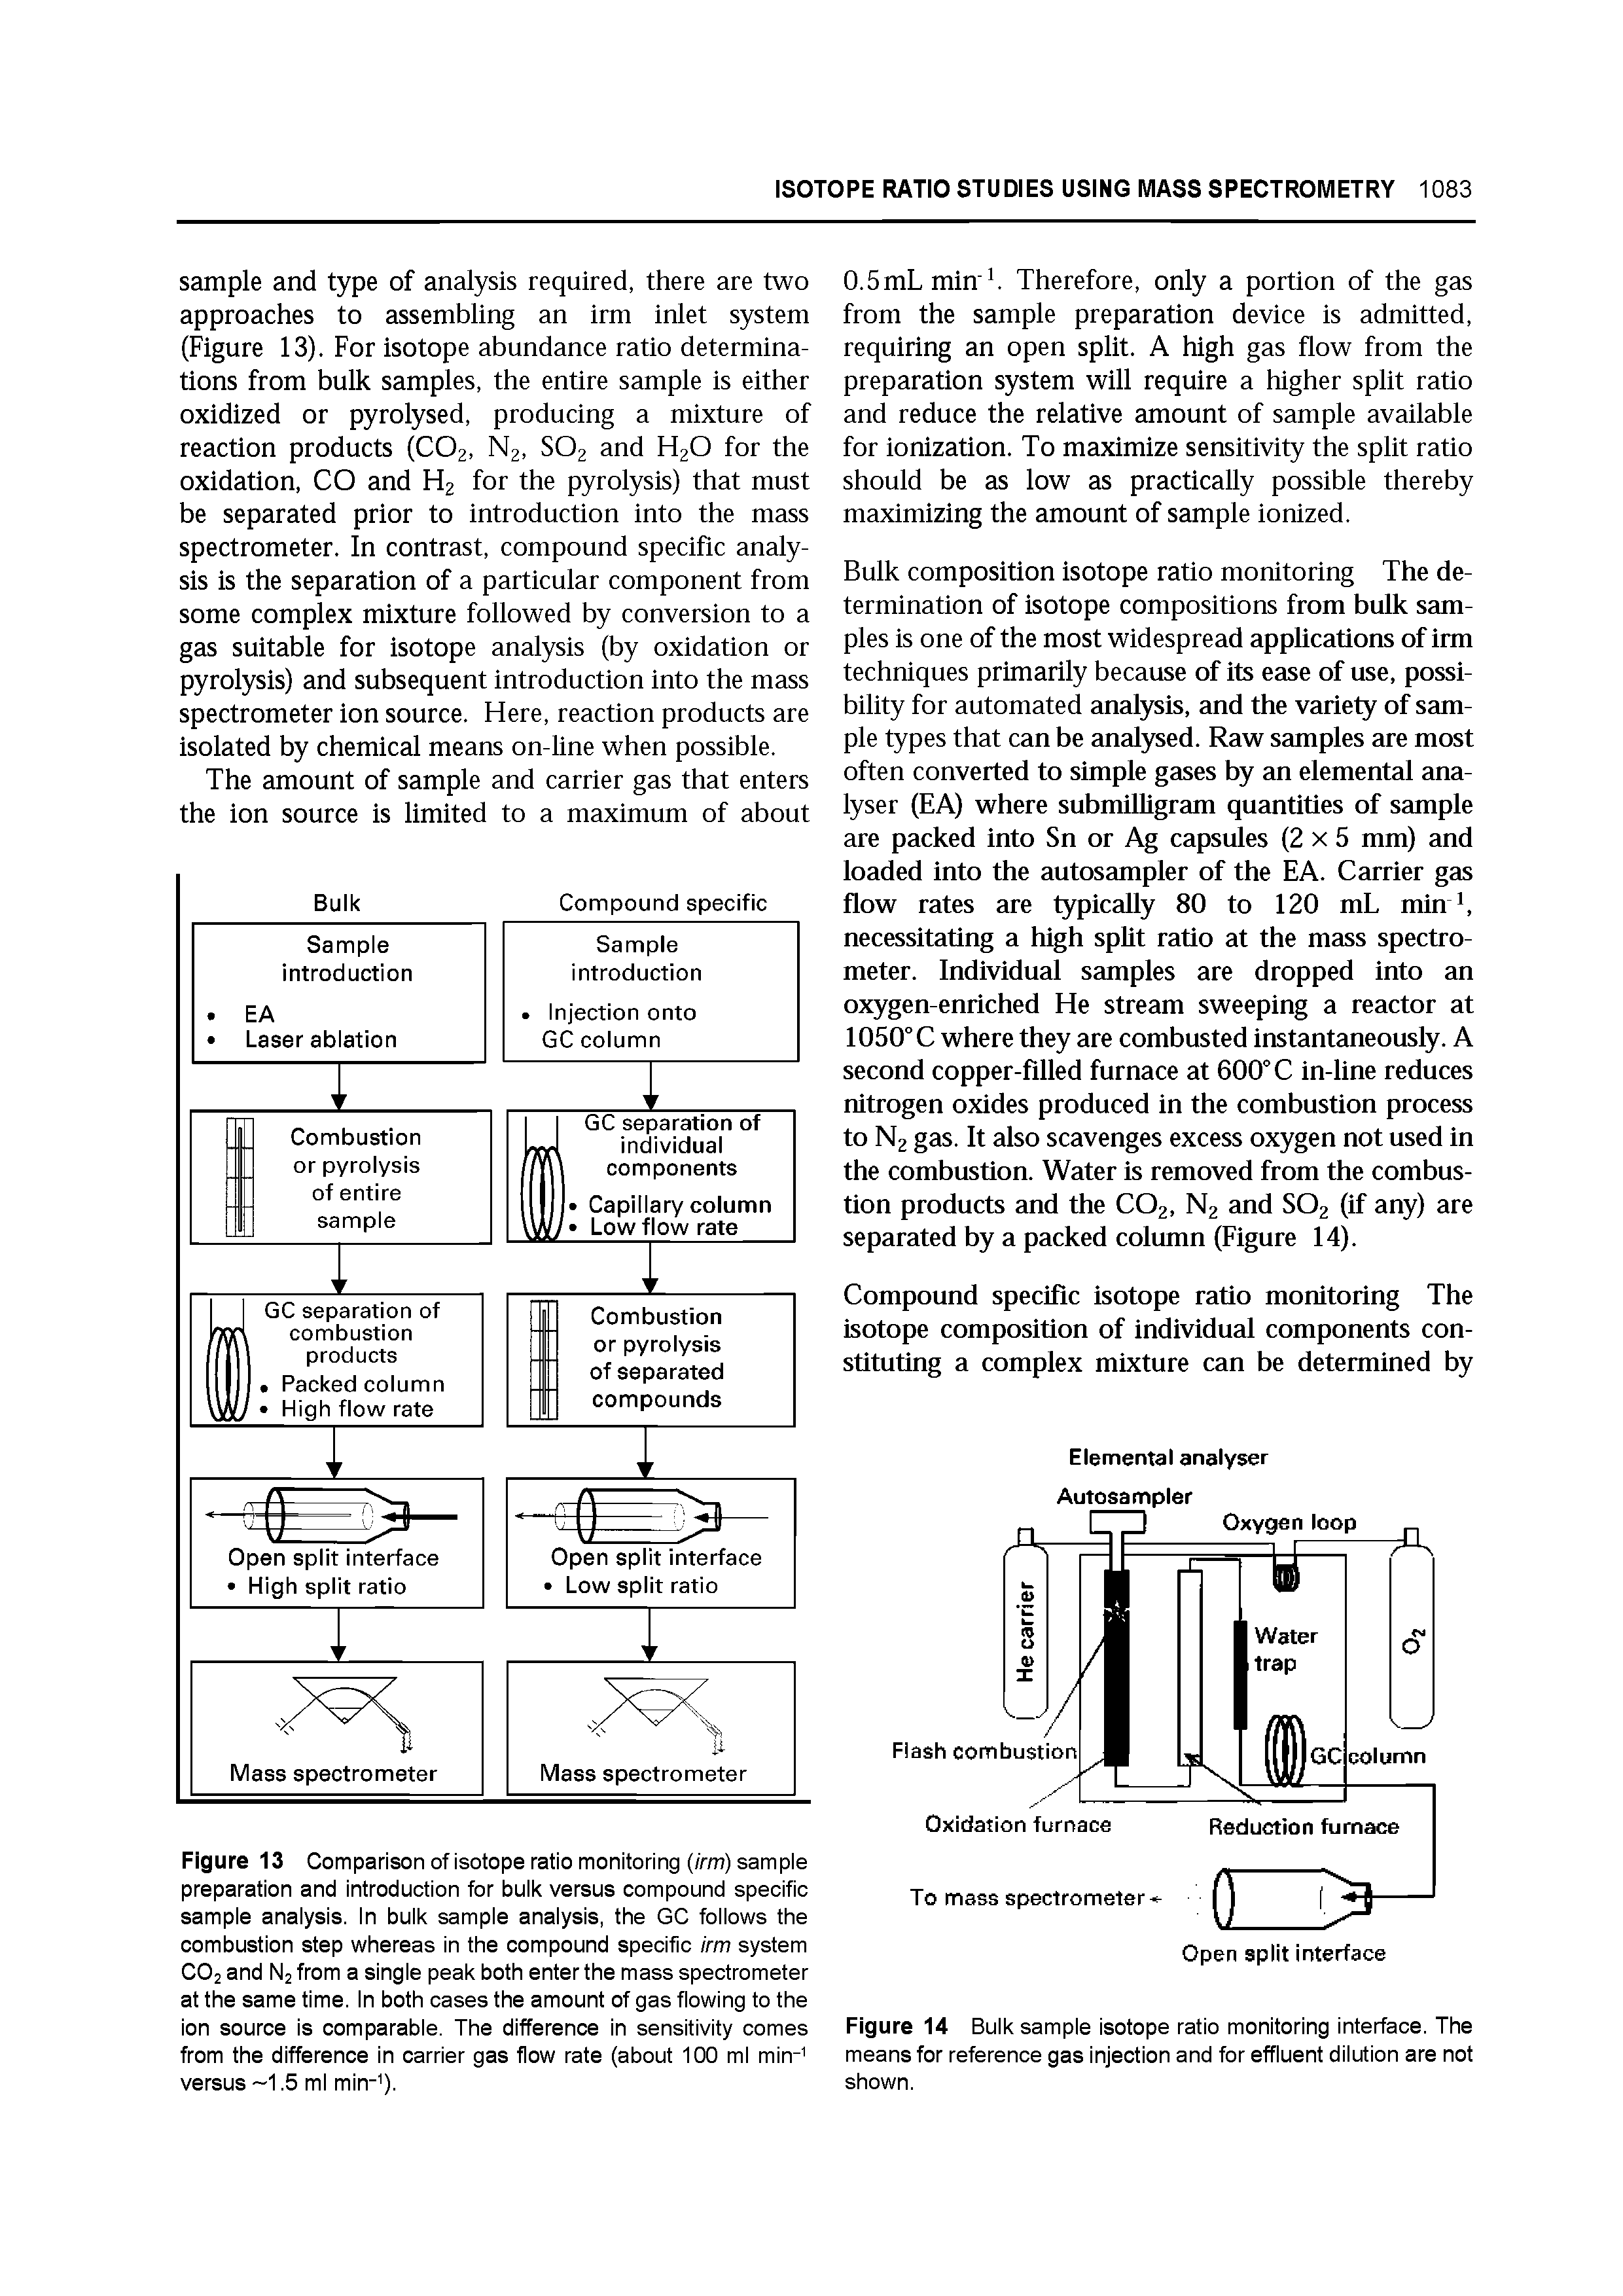 Figure 13 Comparison of isotope ratio monitoring (irm) sample preparation and introduction for bulk versus compound specific sample analysis. In bulk sample analysis, the GC follows the combustion step whereas in the oompound specific irm system CO2 and N2 from a single peak both enter the mass spectrometer at the same time. In both cases the amount of gas flowing to the ion souroe is 00m parable. The difference in sensitivity comes from the differenoe in oarrier gas flow rate (about 100 ml min- versus -1.5 ml min- ).